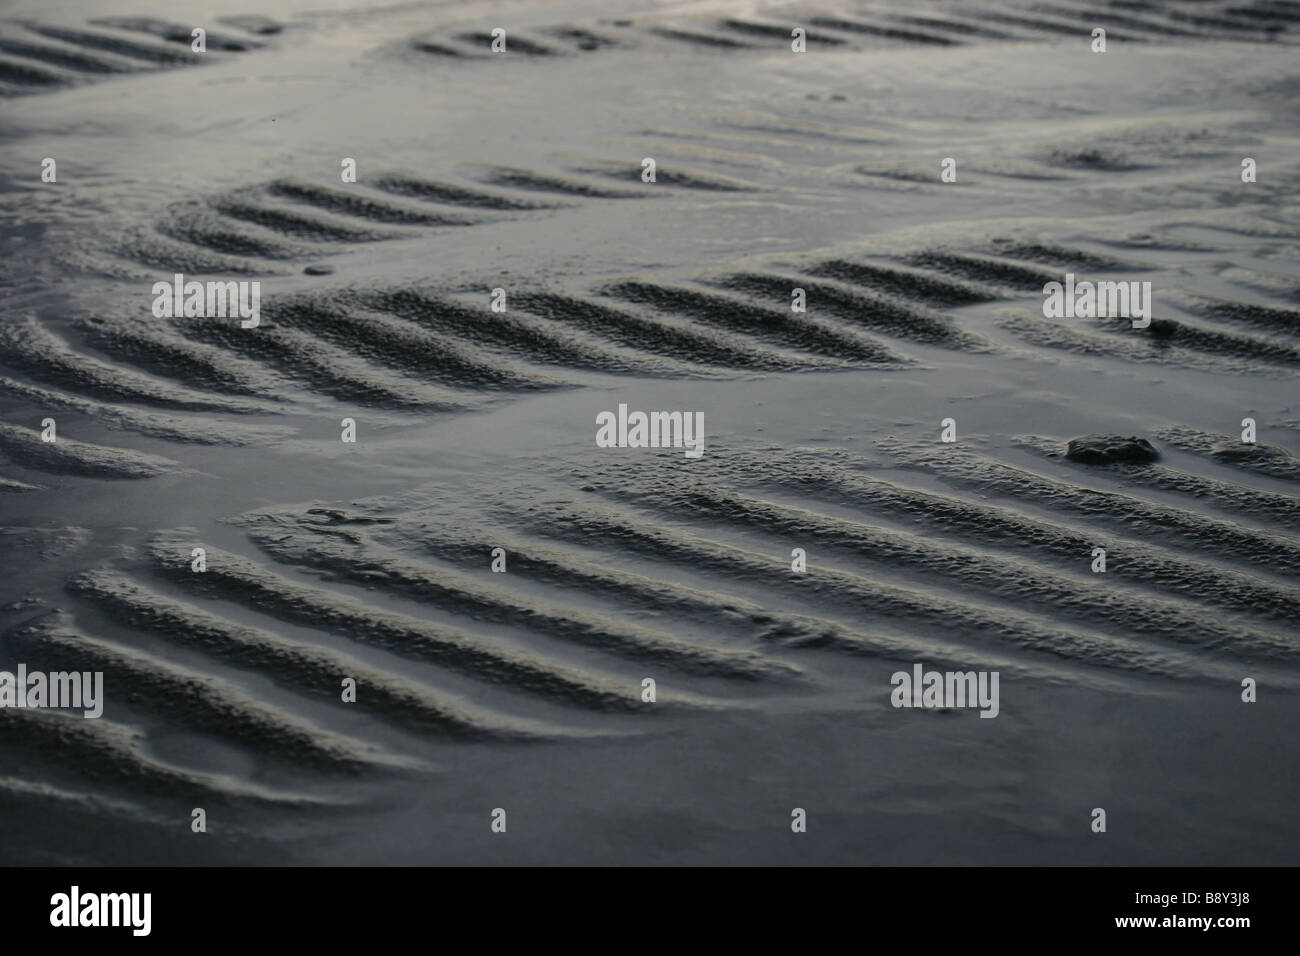 Corrugations in sand at low tide Stock Photo